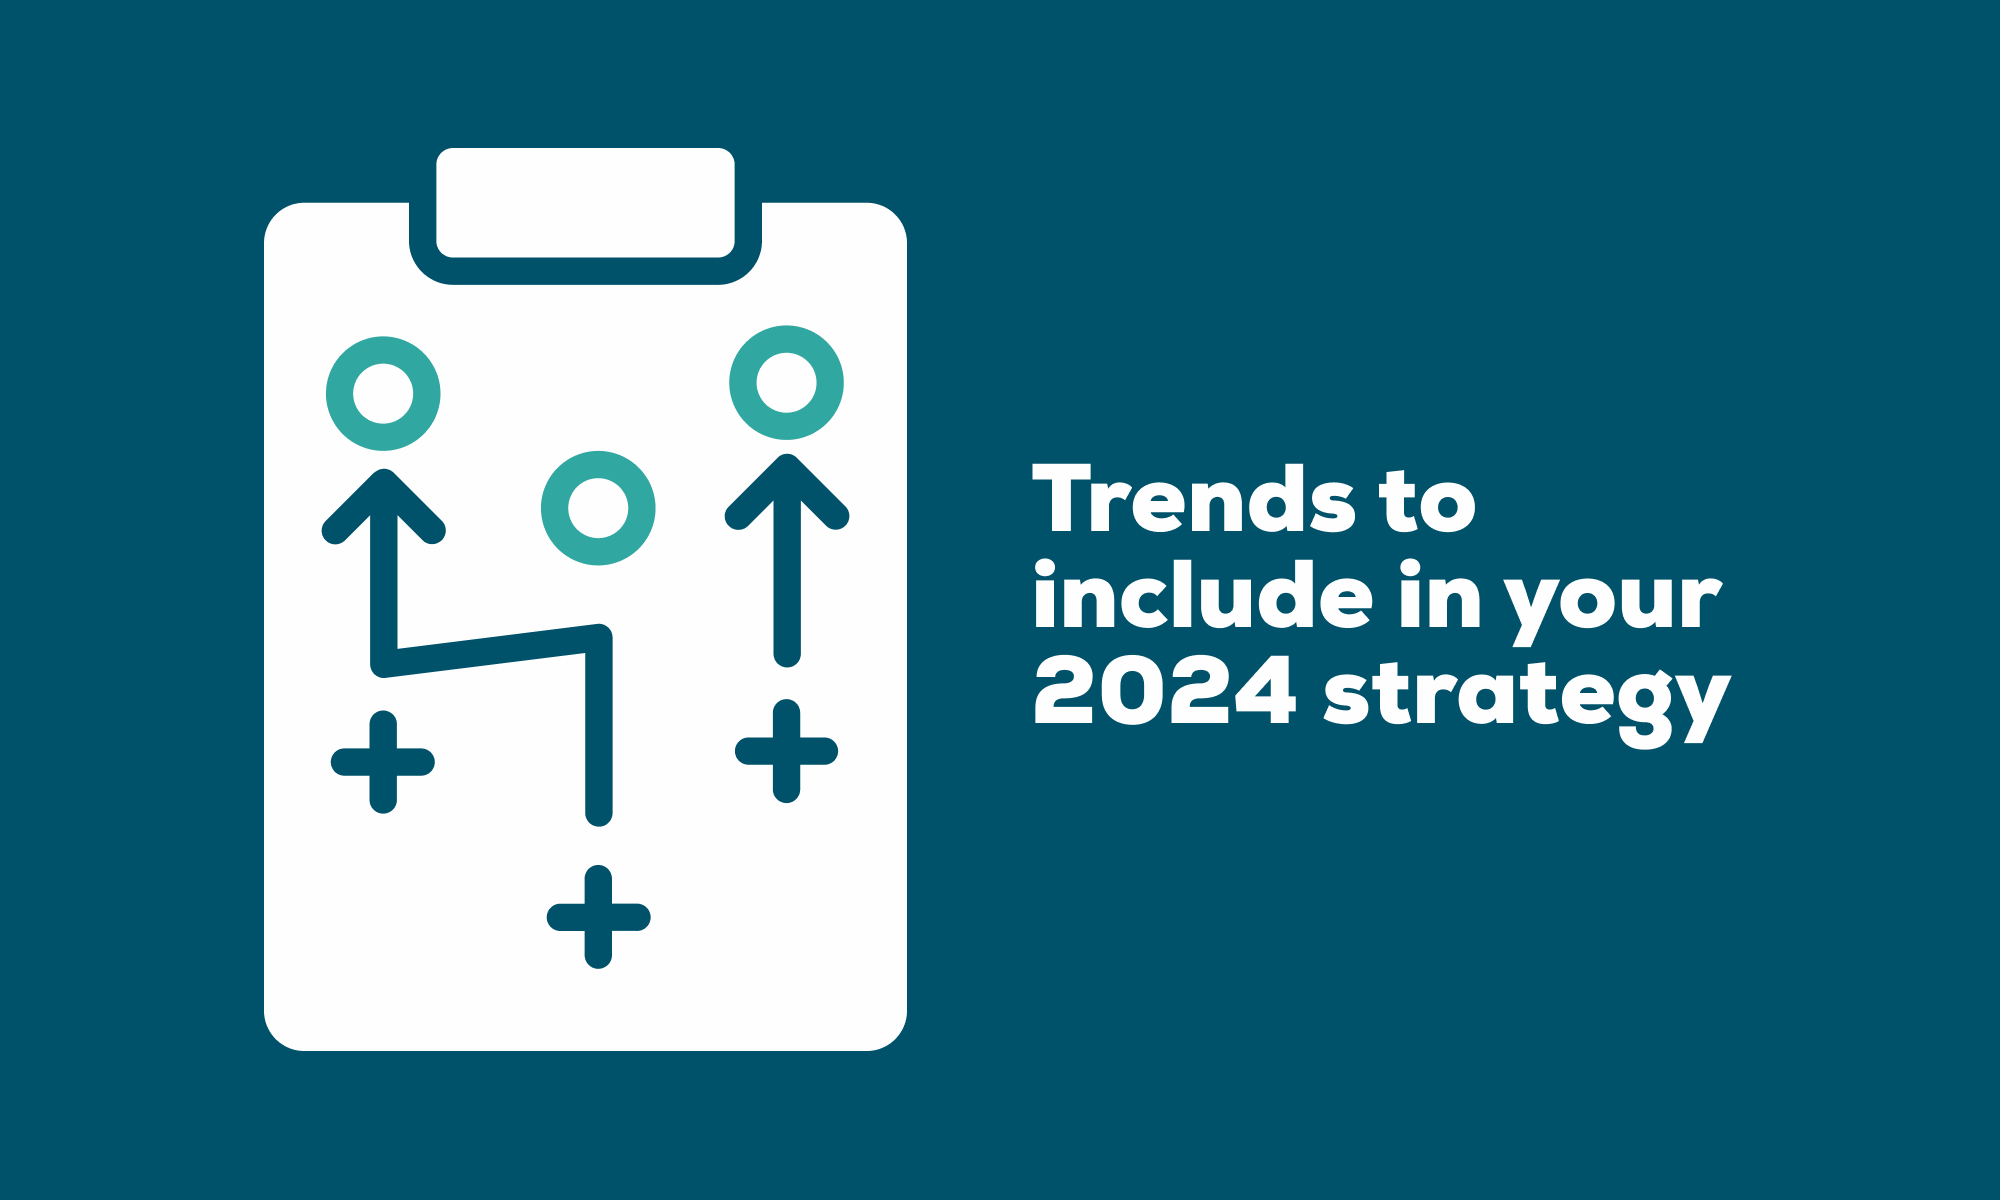 Trends to include in your 2024 strategy